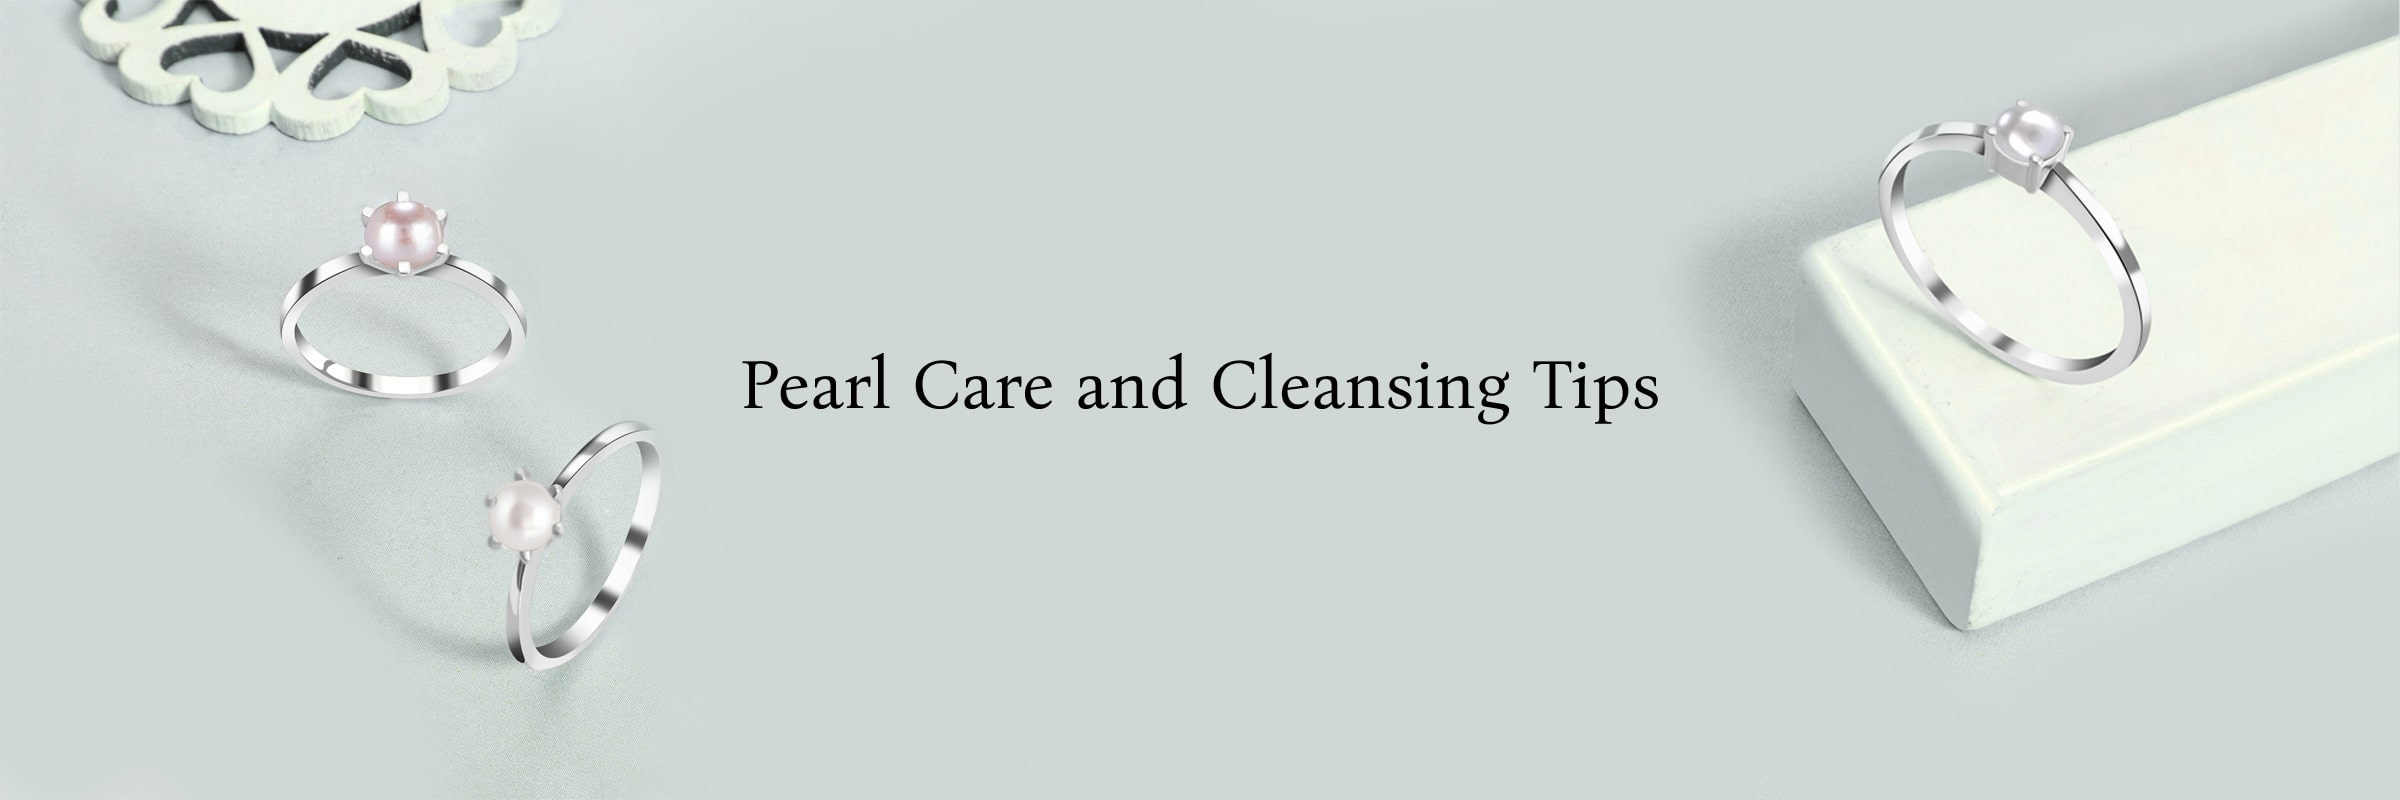 How To Cleanse Pearl